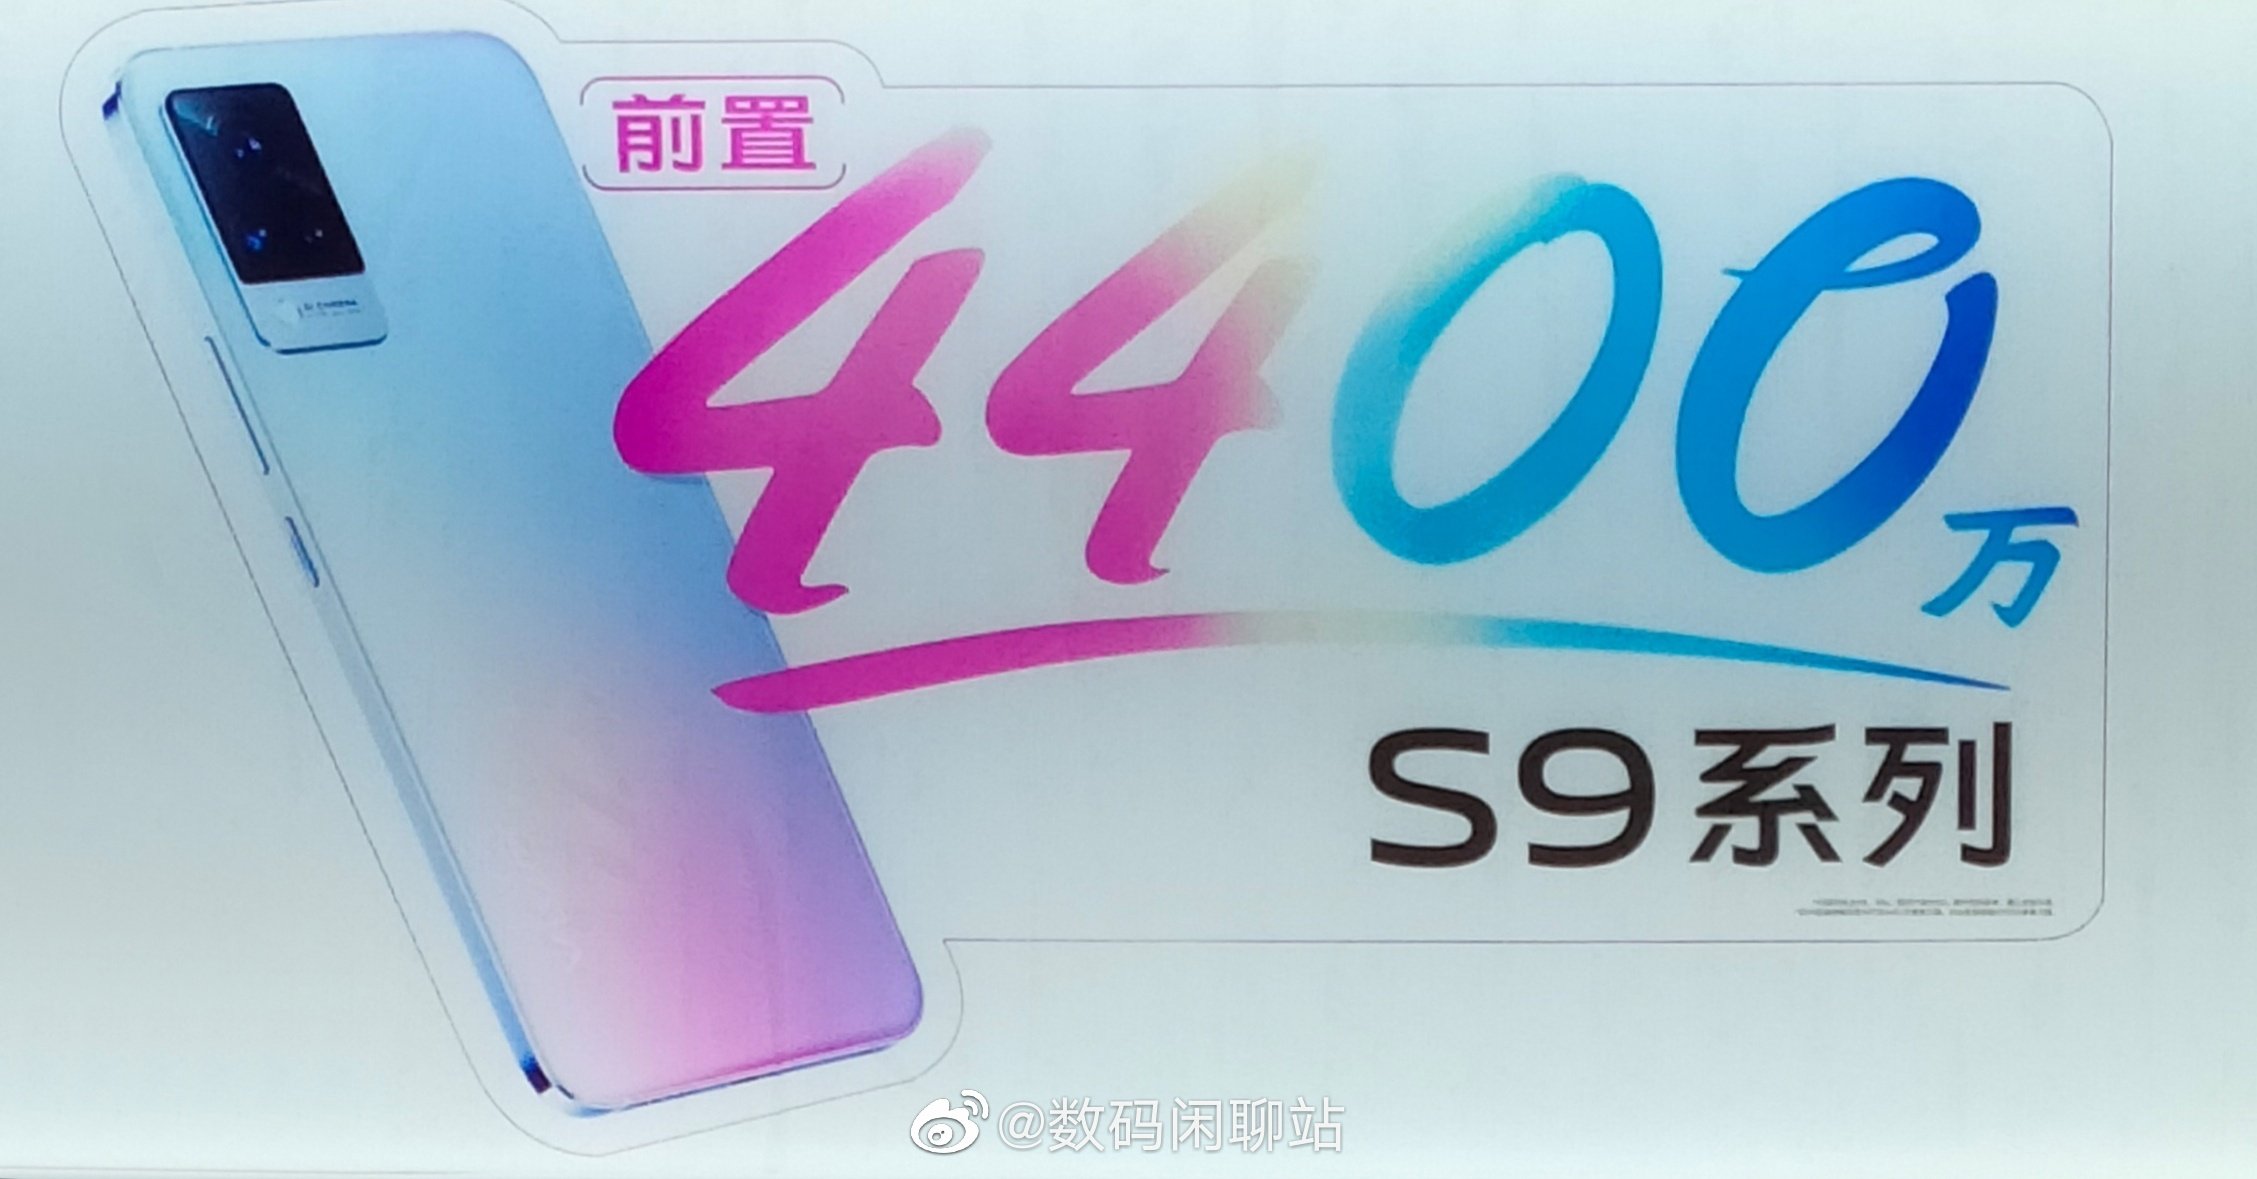 Vivo S9 series poster leaked, reveals 44MP selfie camera and rear design